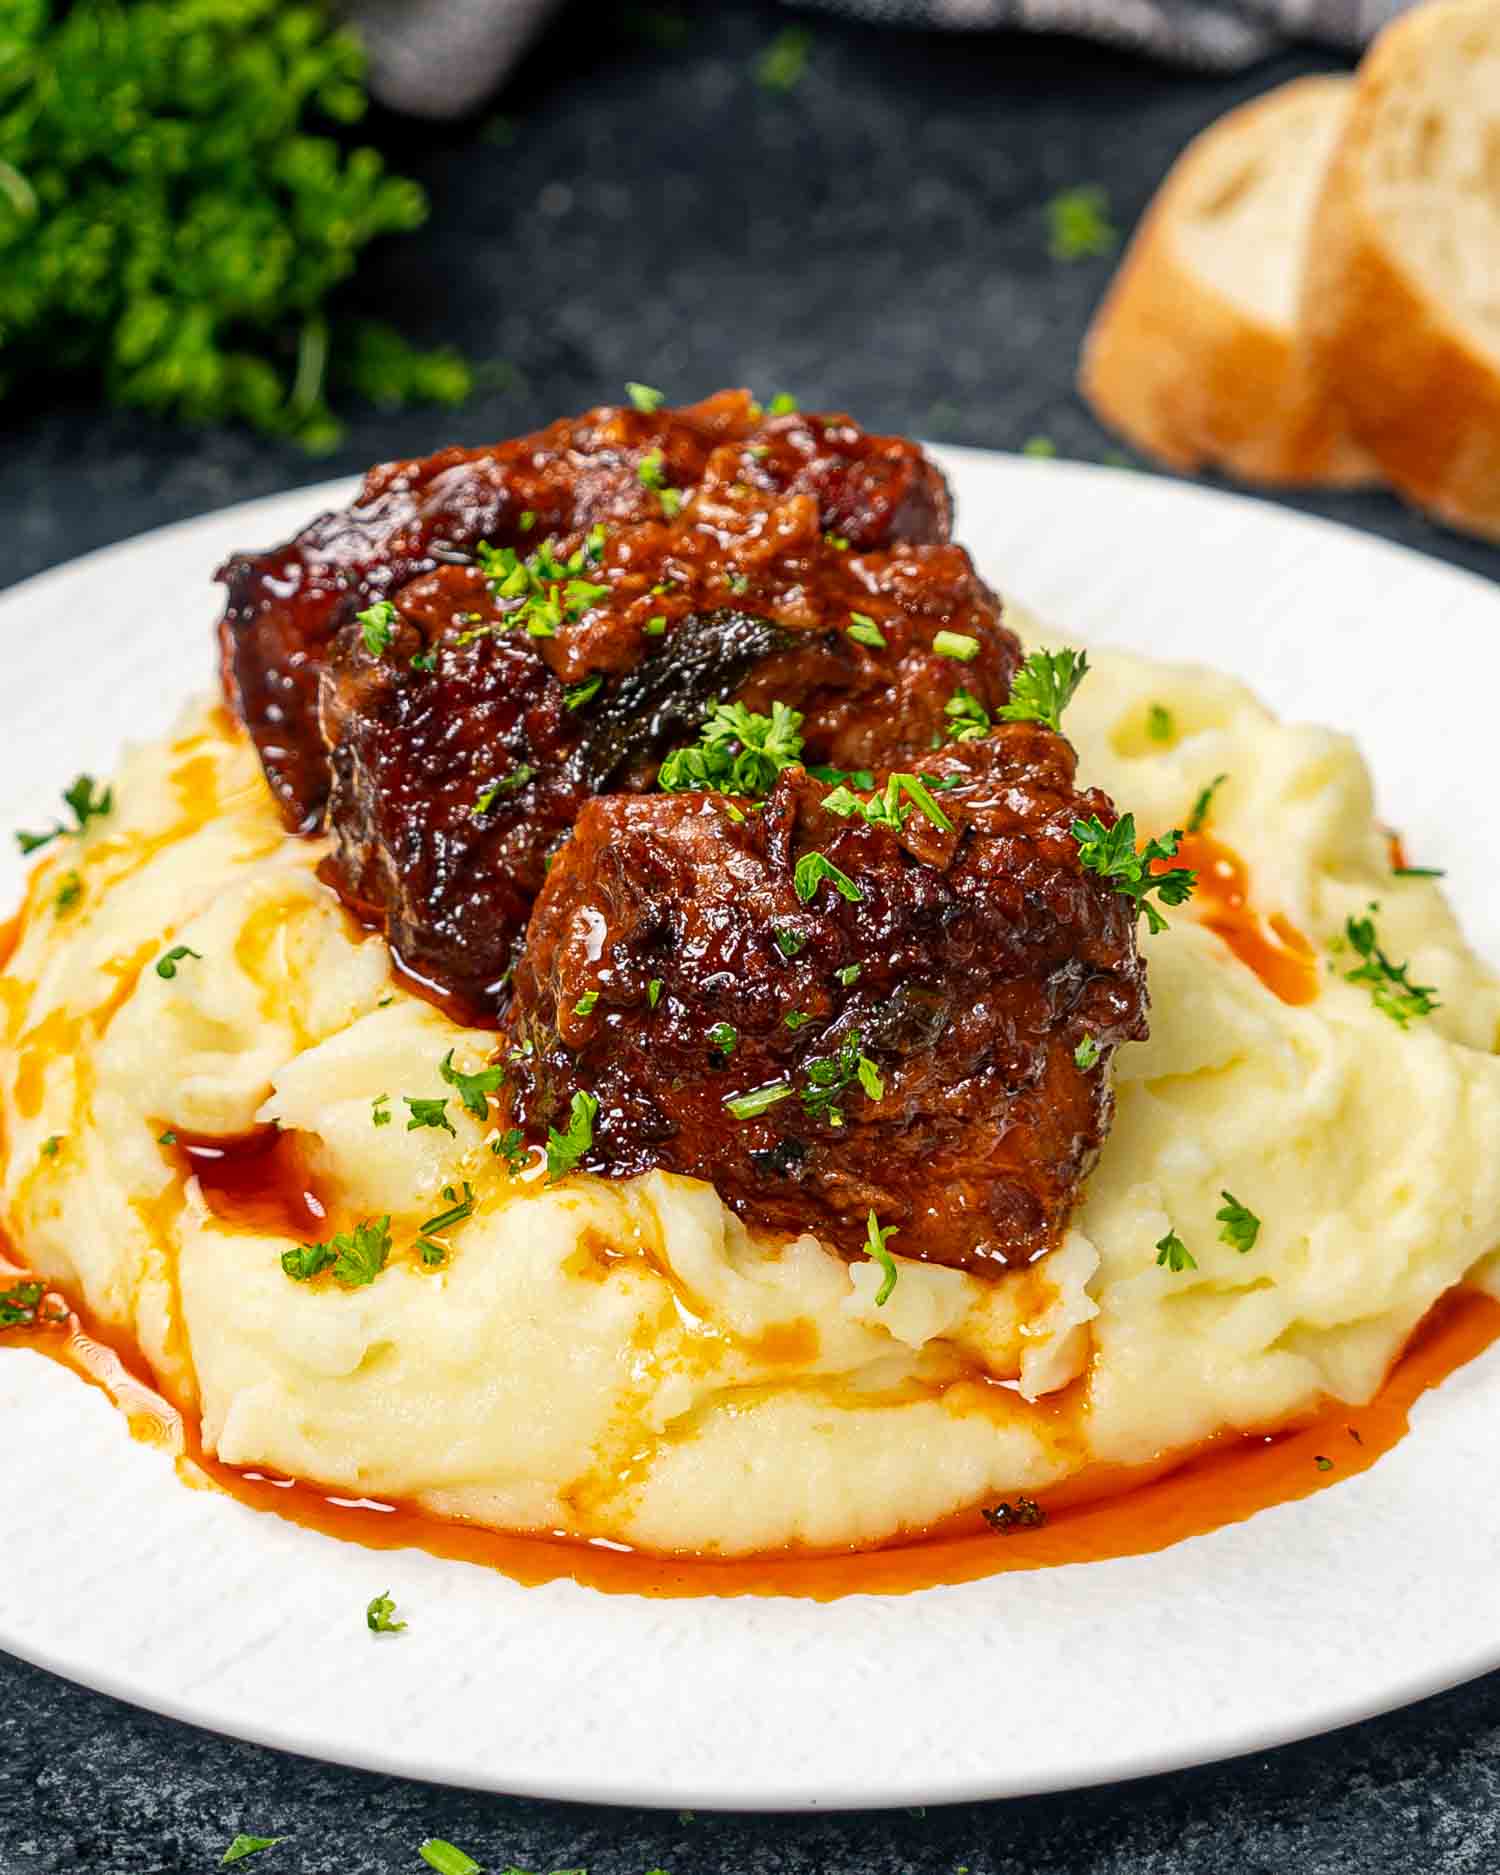 two guinness braised short ribs on a bed of mashed potatoes in a plate.